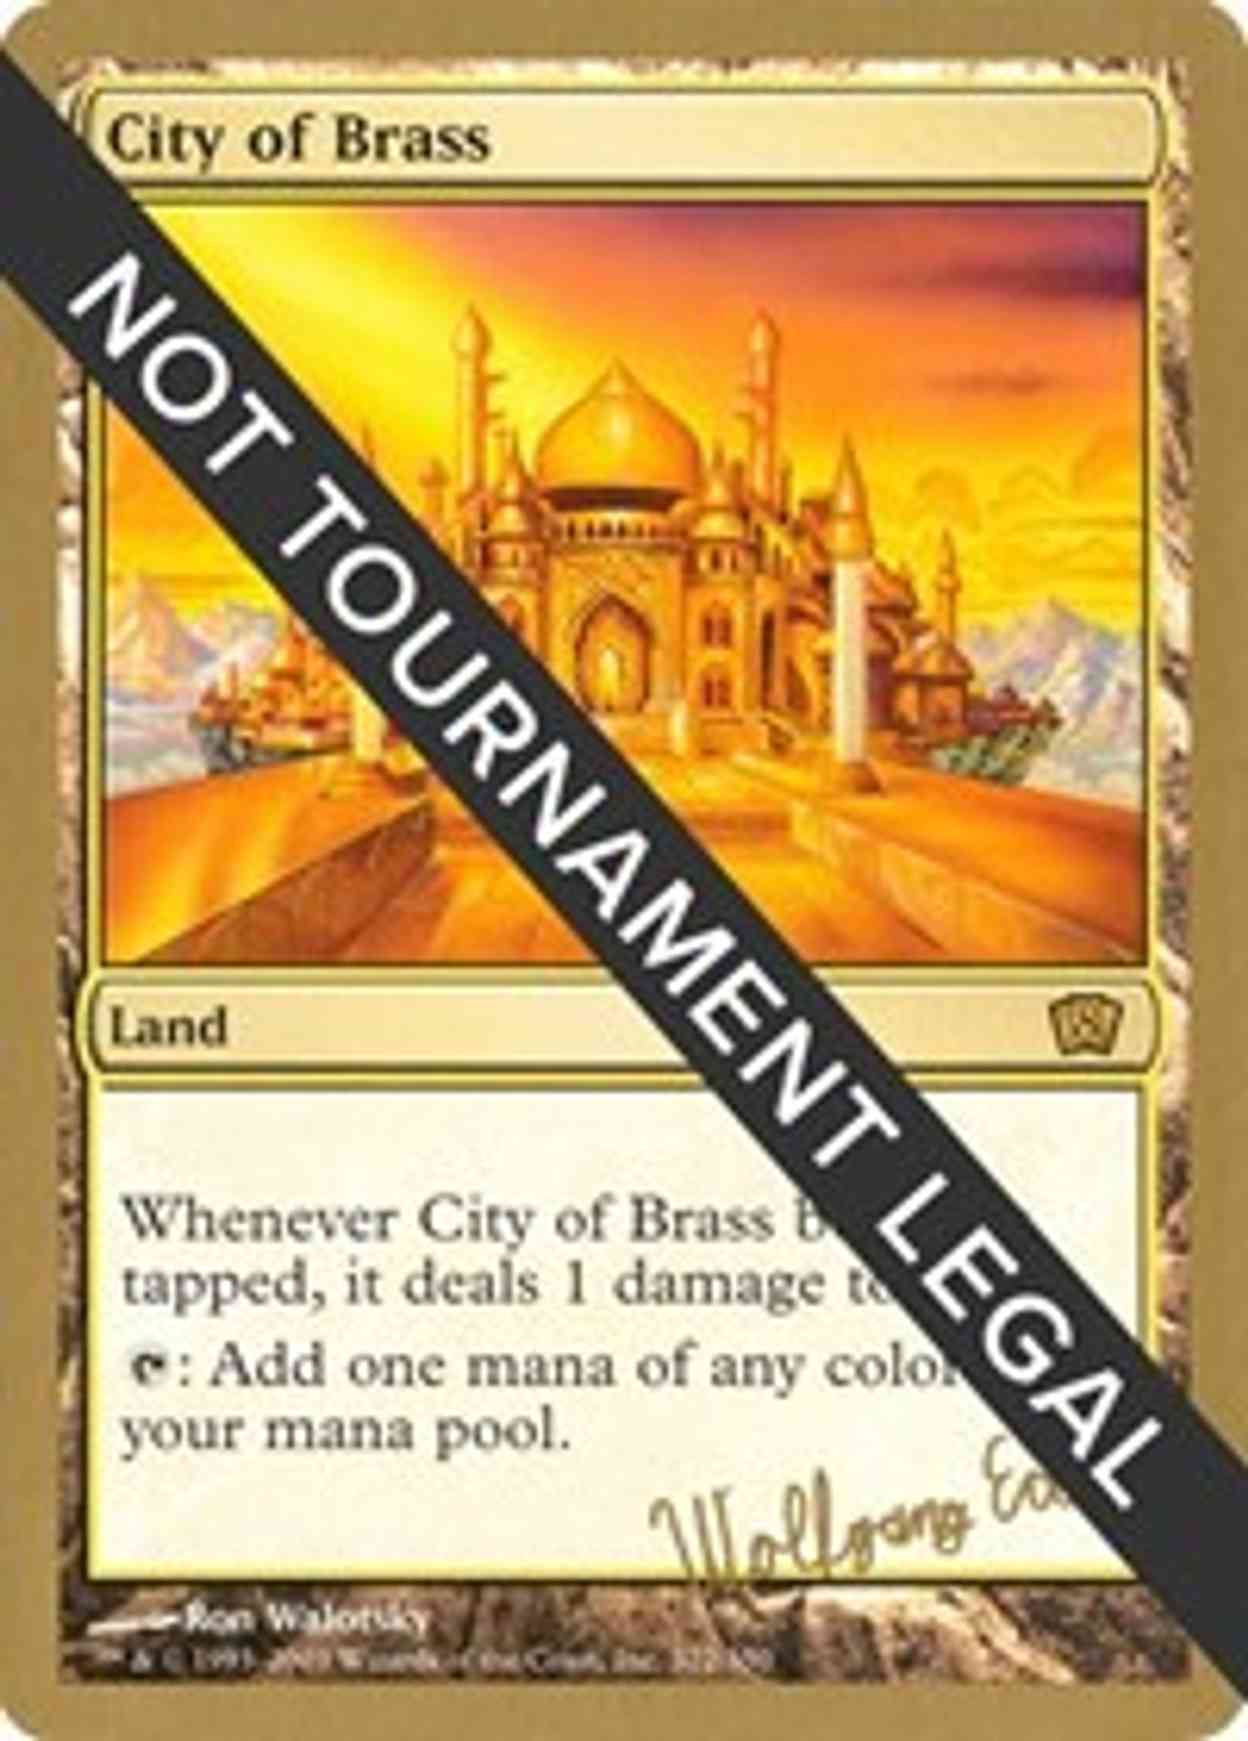 City of Brass - 2003 Wolfgang Eder (8ED) magic card front